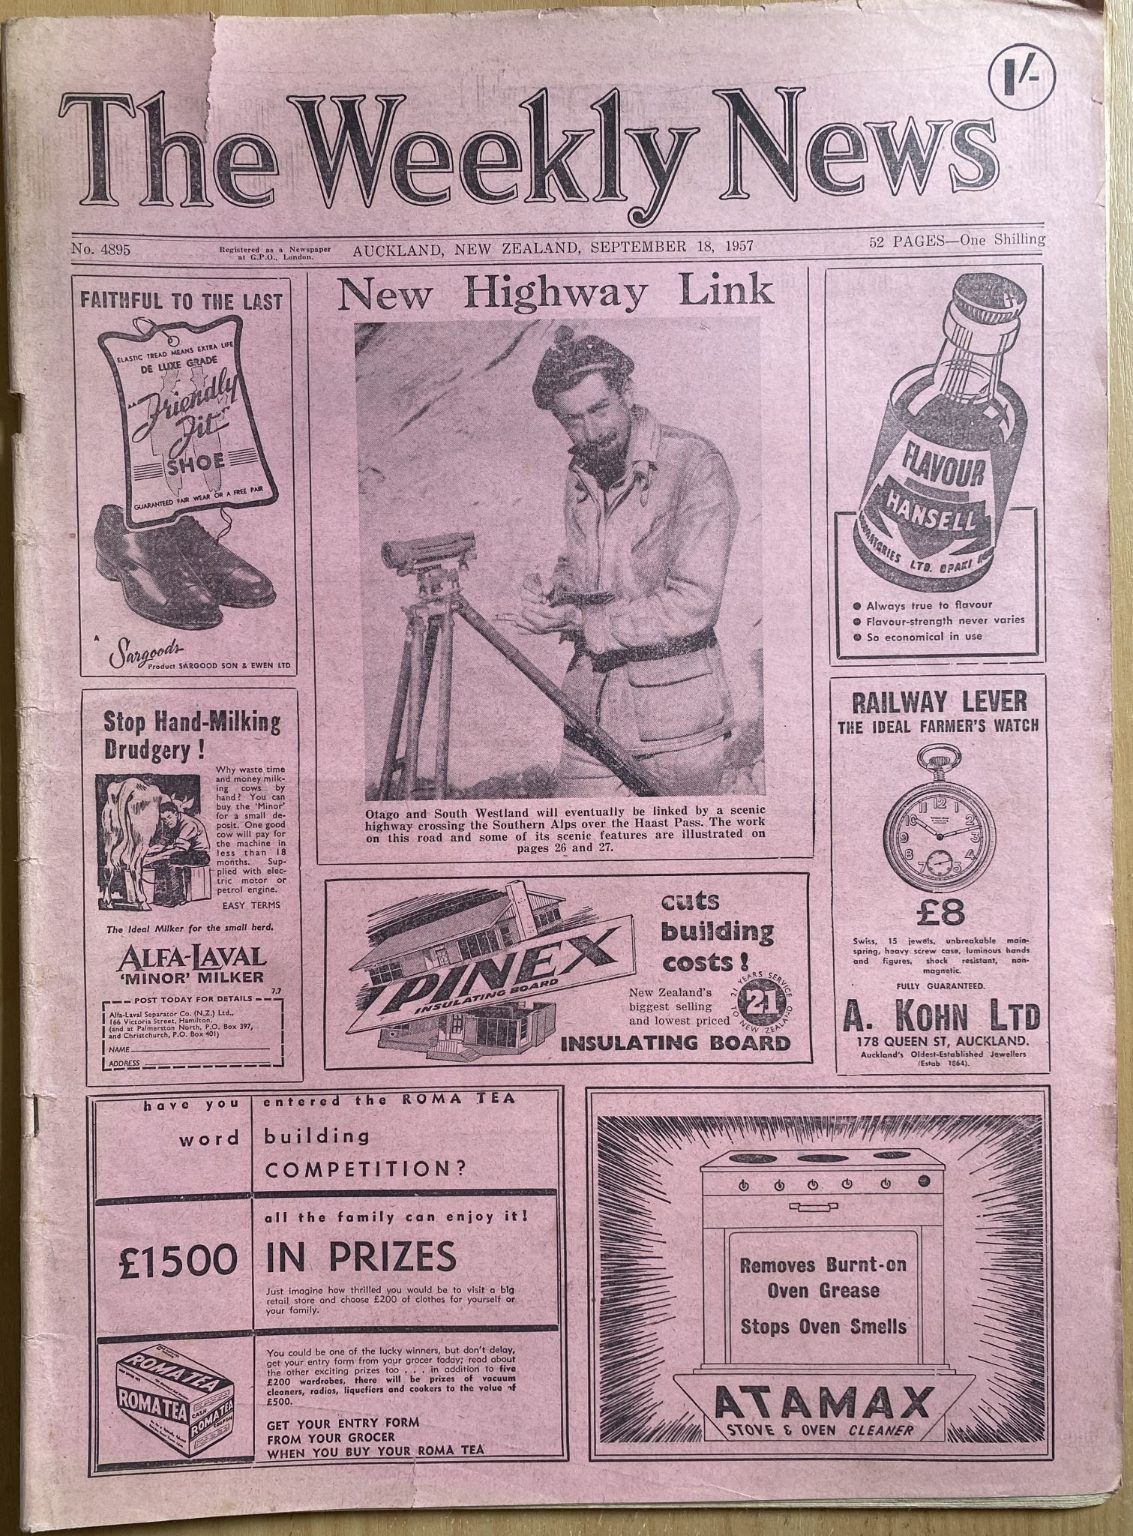 OLD NEWSPAPER: The Weekly News, No. 4895, 18 September 1957